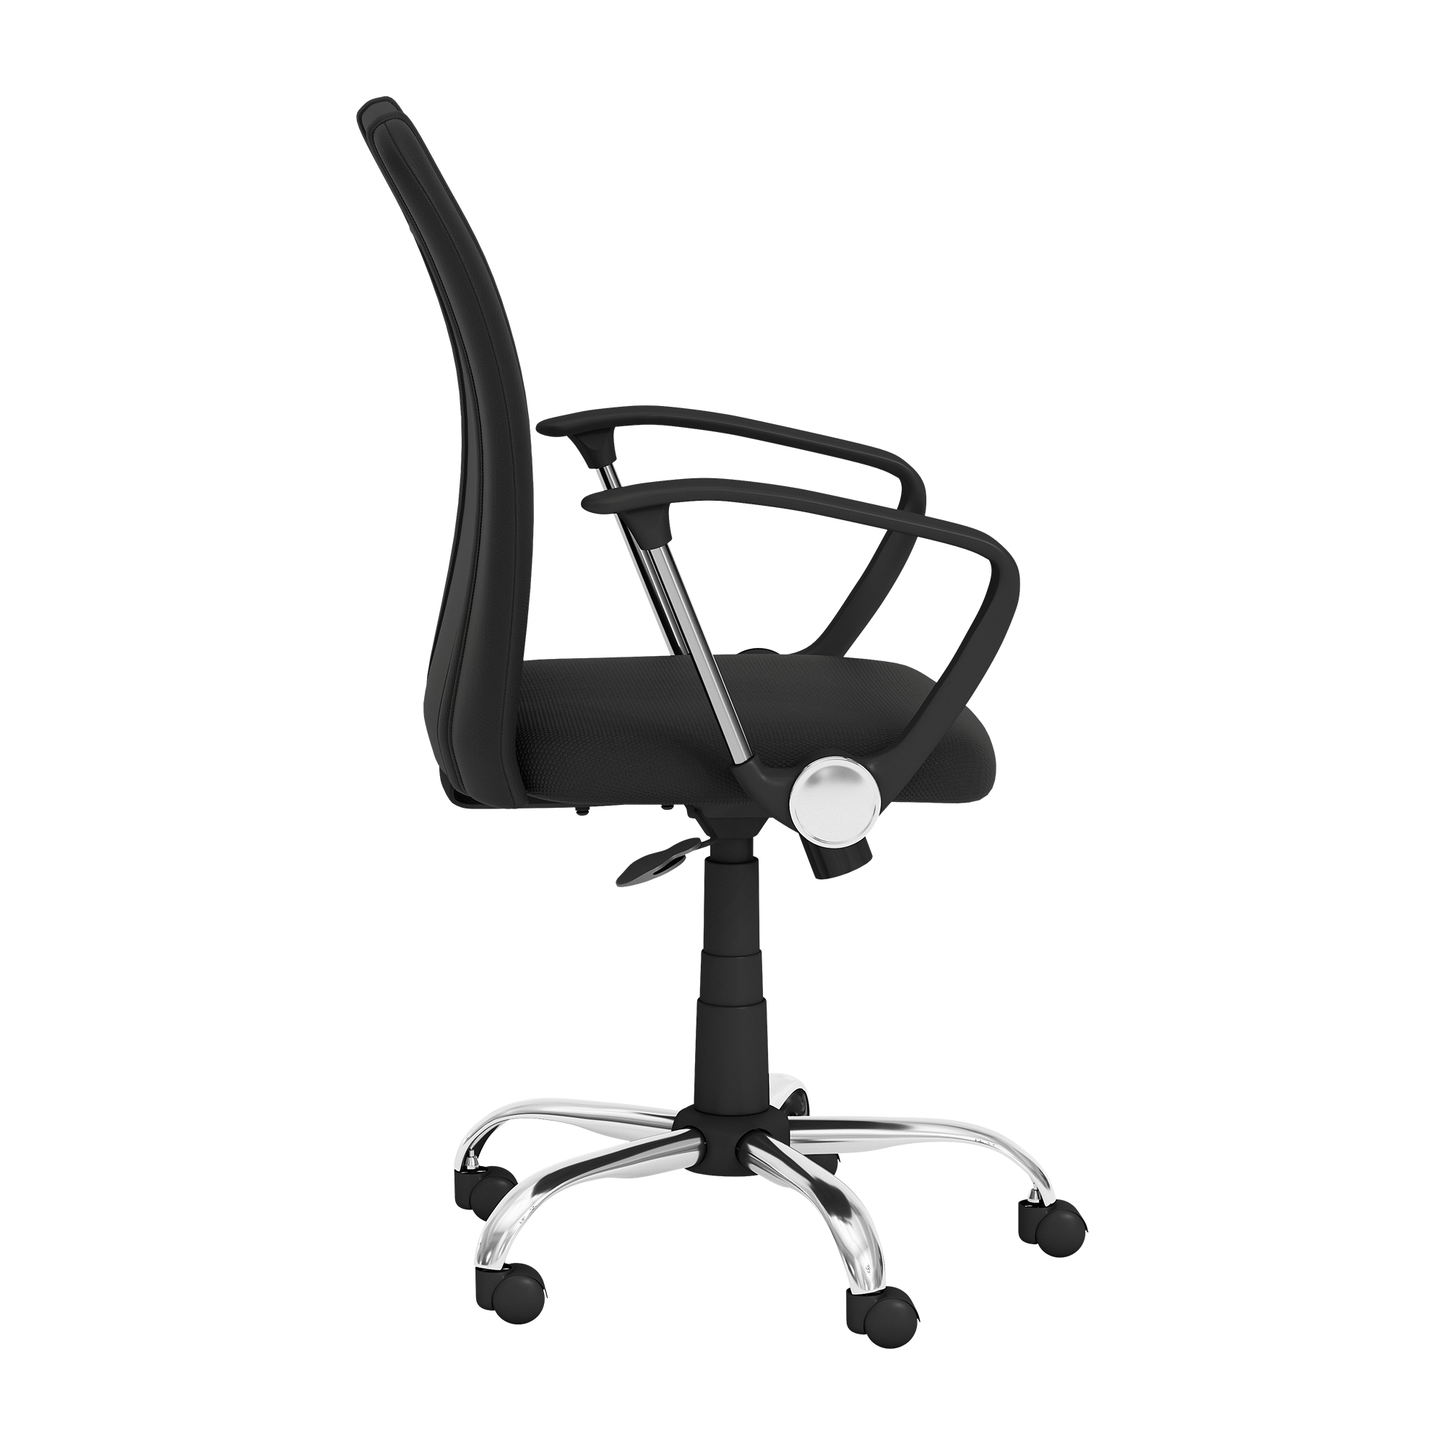 Curve Task Chair with Miami Hurricanes Secondary Logo